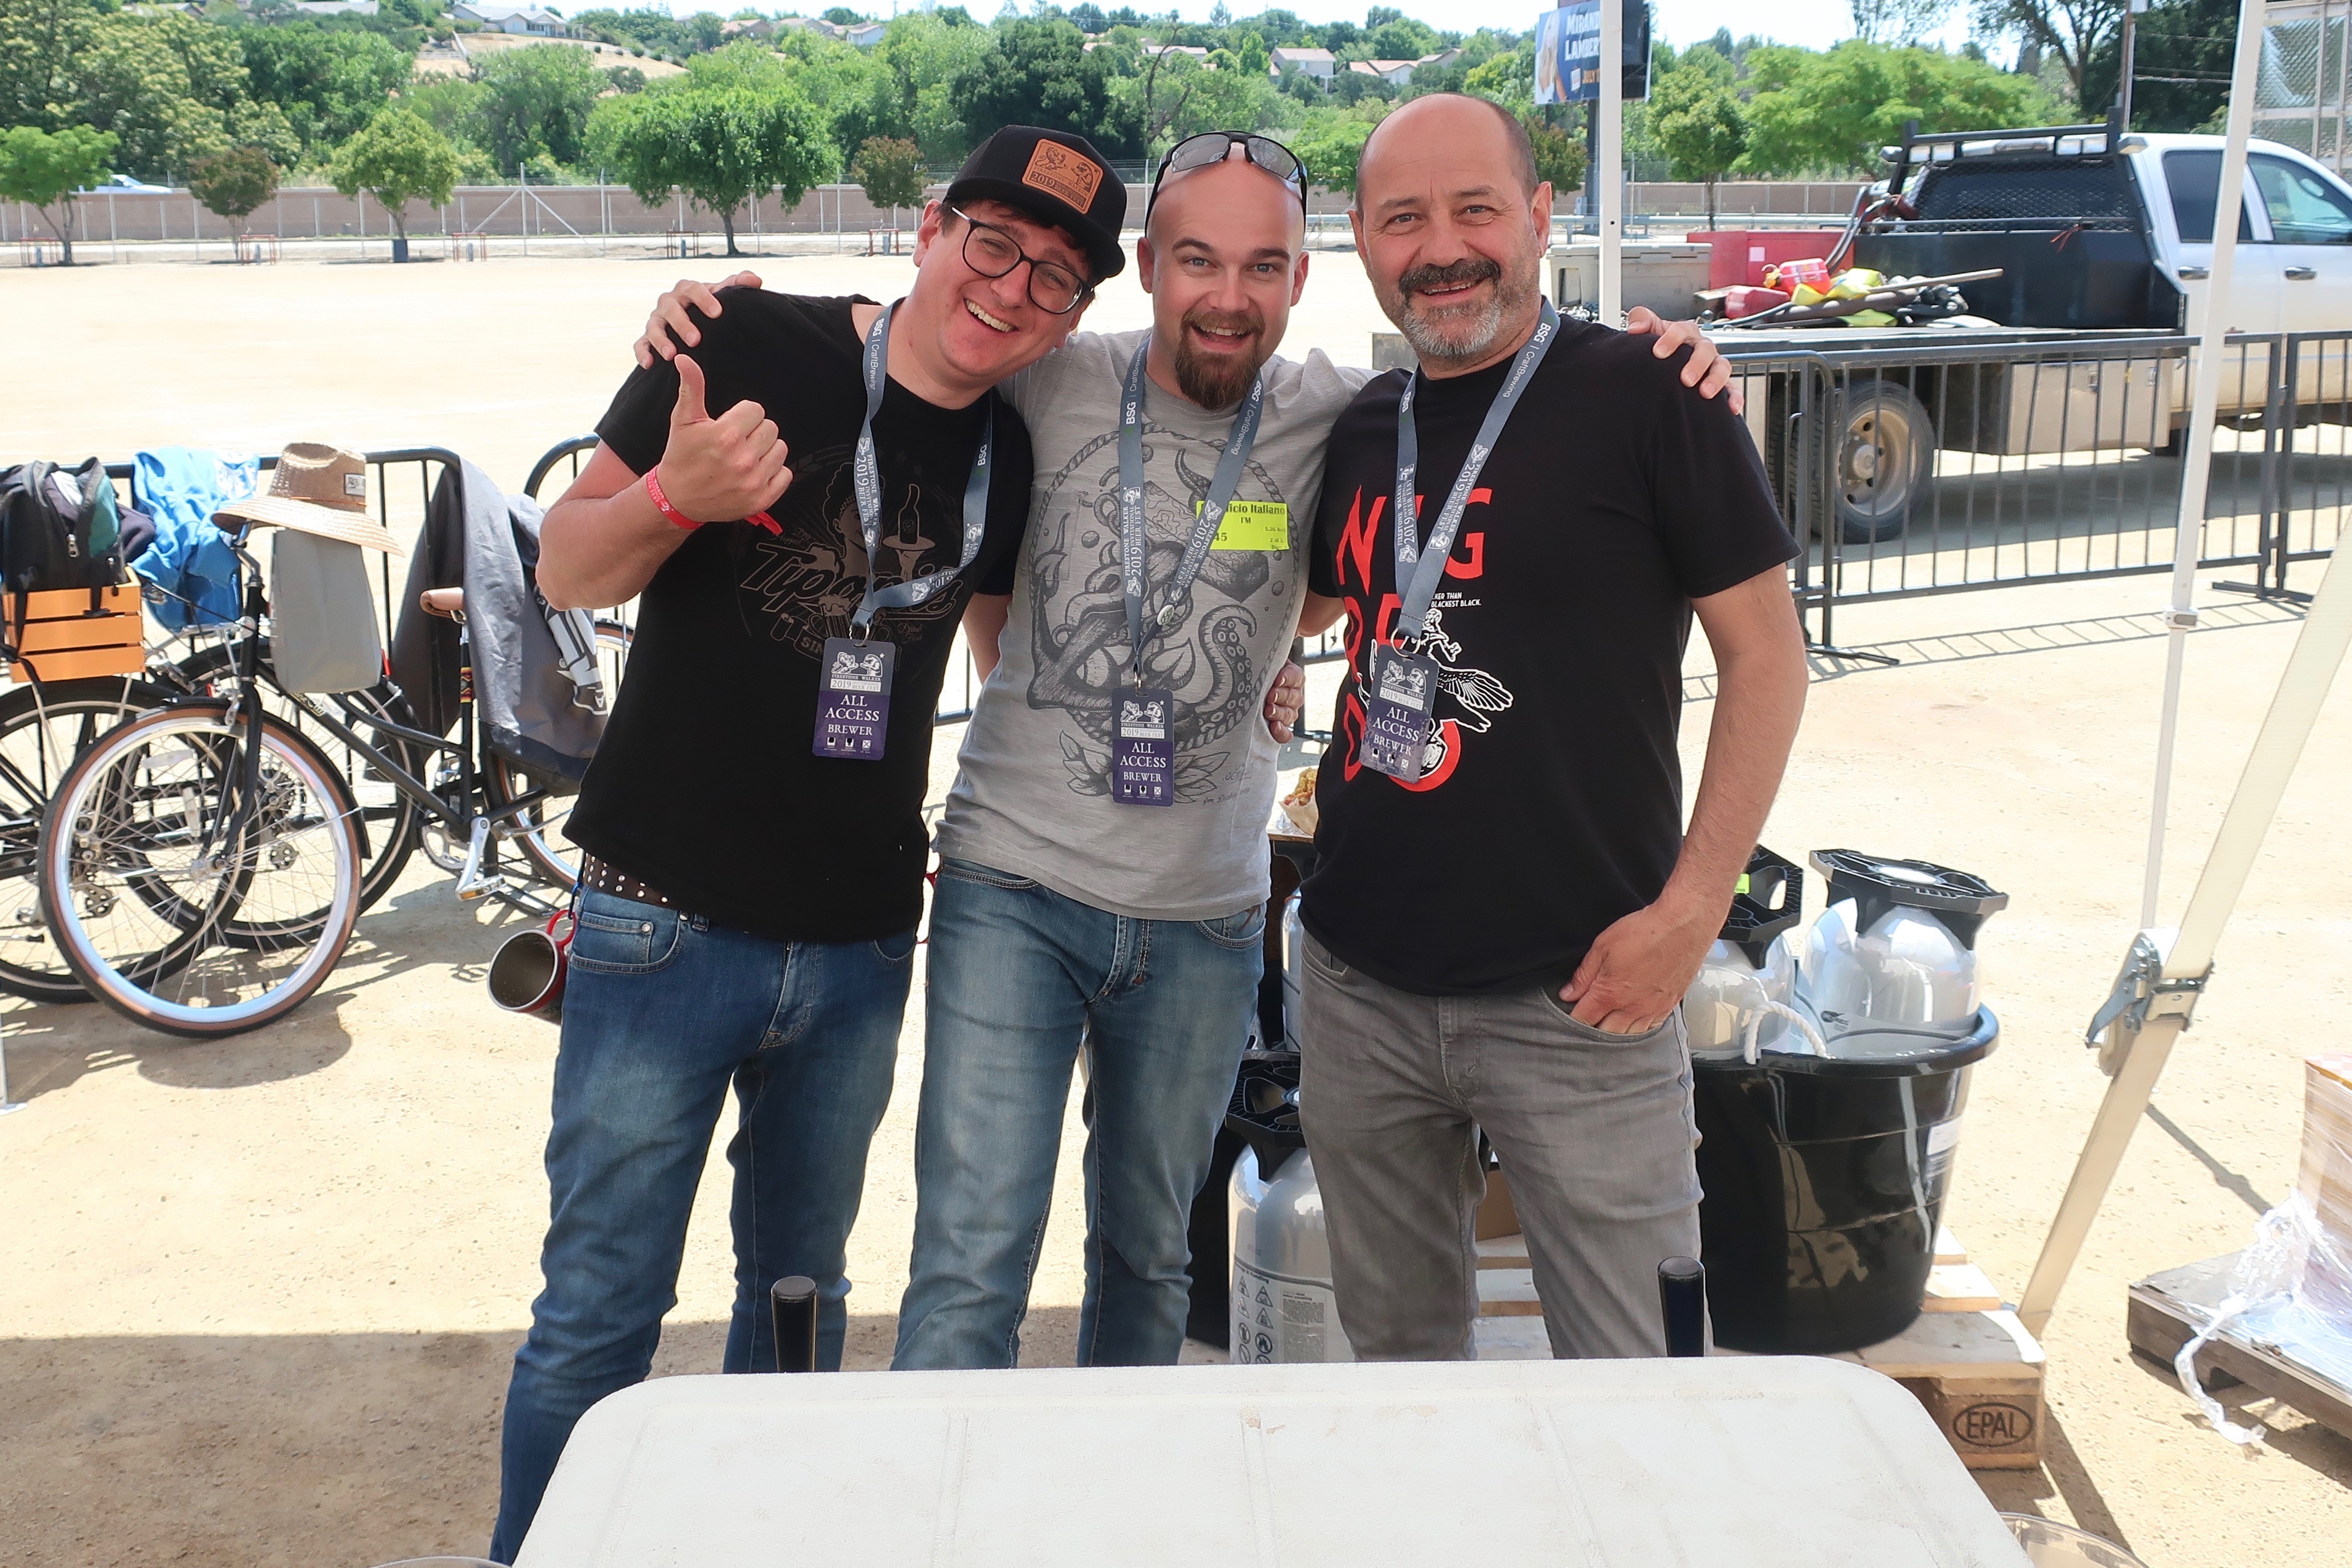 The crew from Birrificio Italiano that traveled from Italy at the 2019 Firestone Walker Invitational Beer Fest.